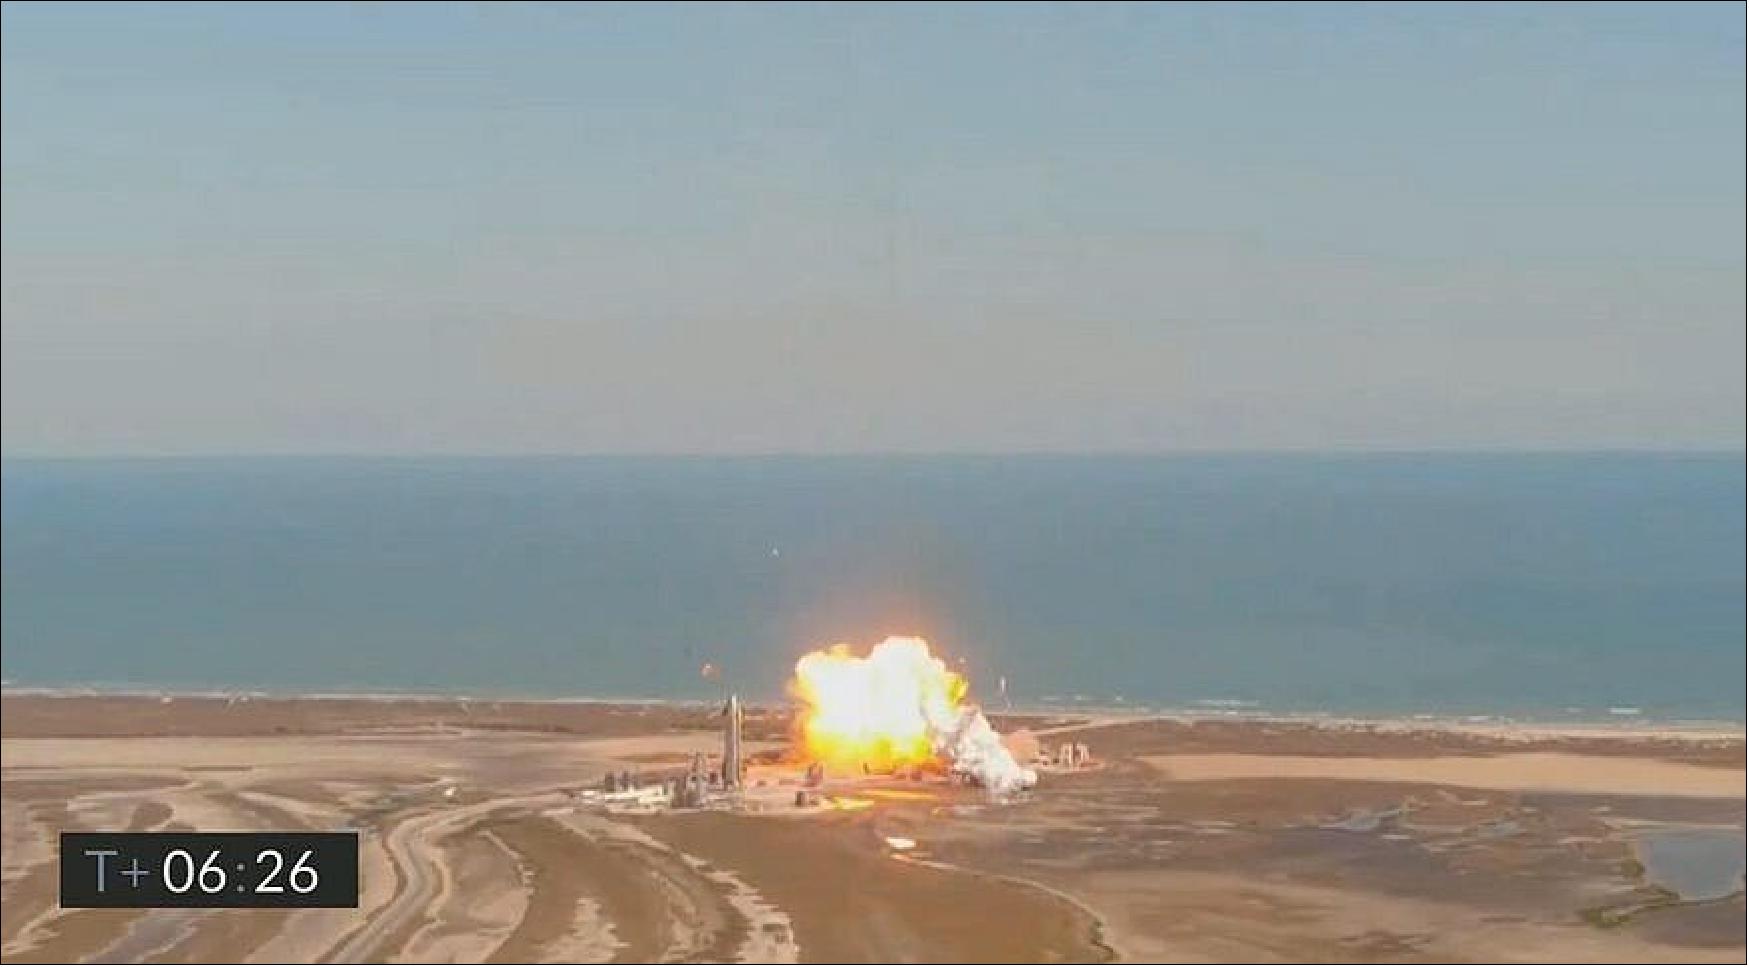 Figure 24: SpaceX's Starship SN9 vehicle explodes after crashing at the end of a test flight Feb. 2 at the company's Boca Chica, Texas, test site (image credit: SpaceX webcast)